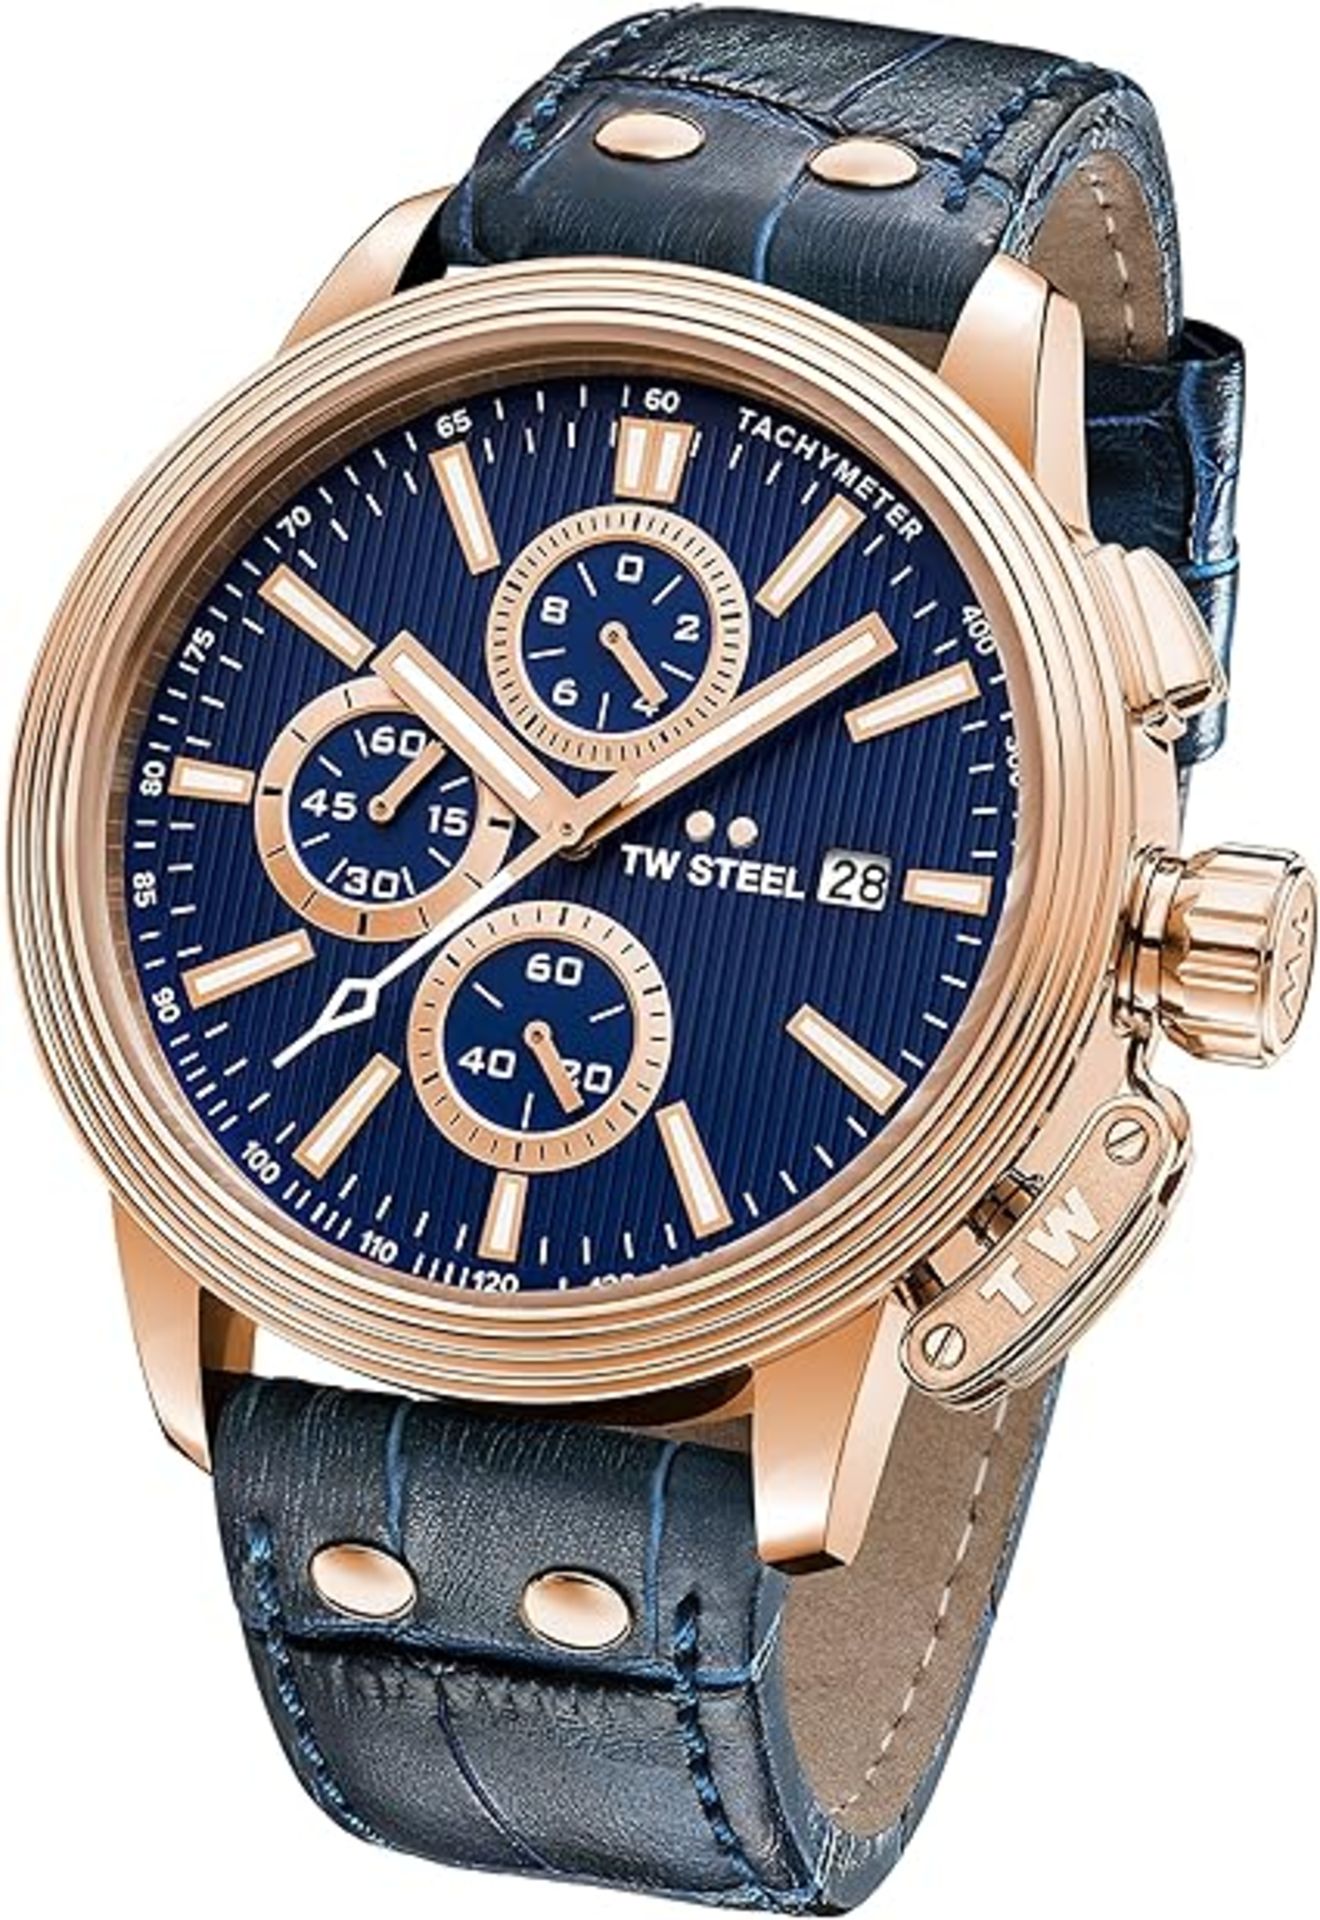 BRAND NEW TW STEEL GENTS CEO ADESSO CHRONOGRAPH WATCH BLUE RRP £279 S/R